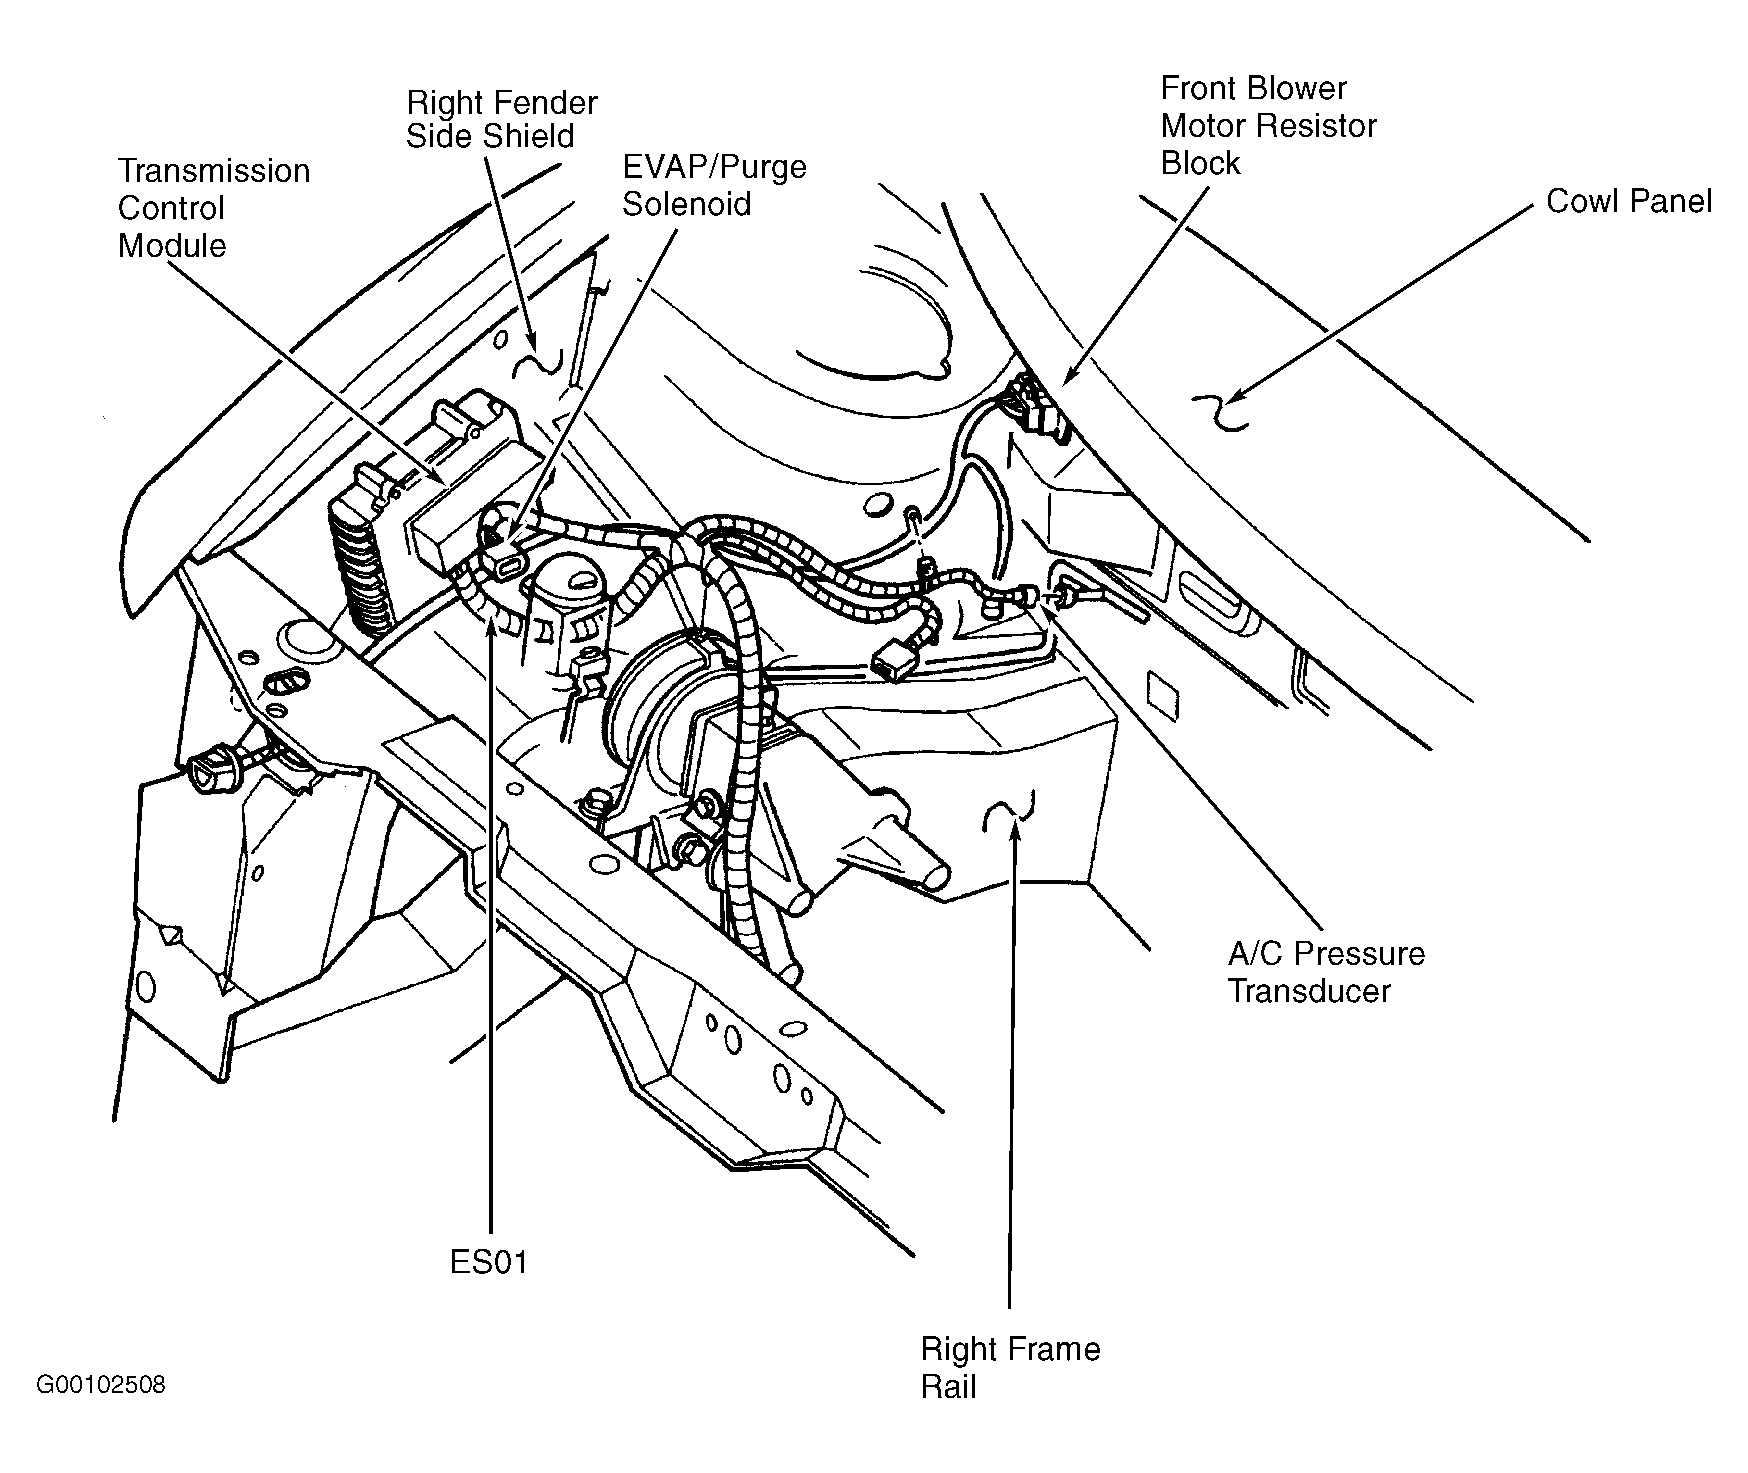 Dodge Grand Caravan SE 1997 - Component Locations -  Right Side Of Engine Compartment